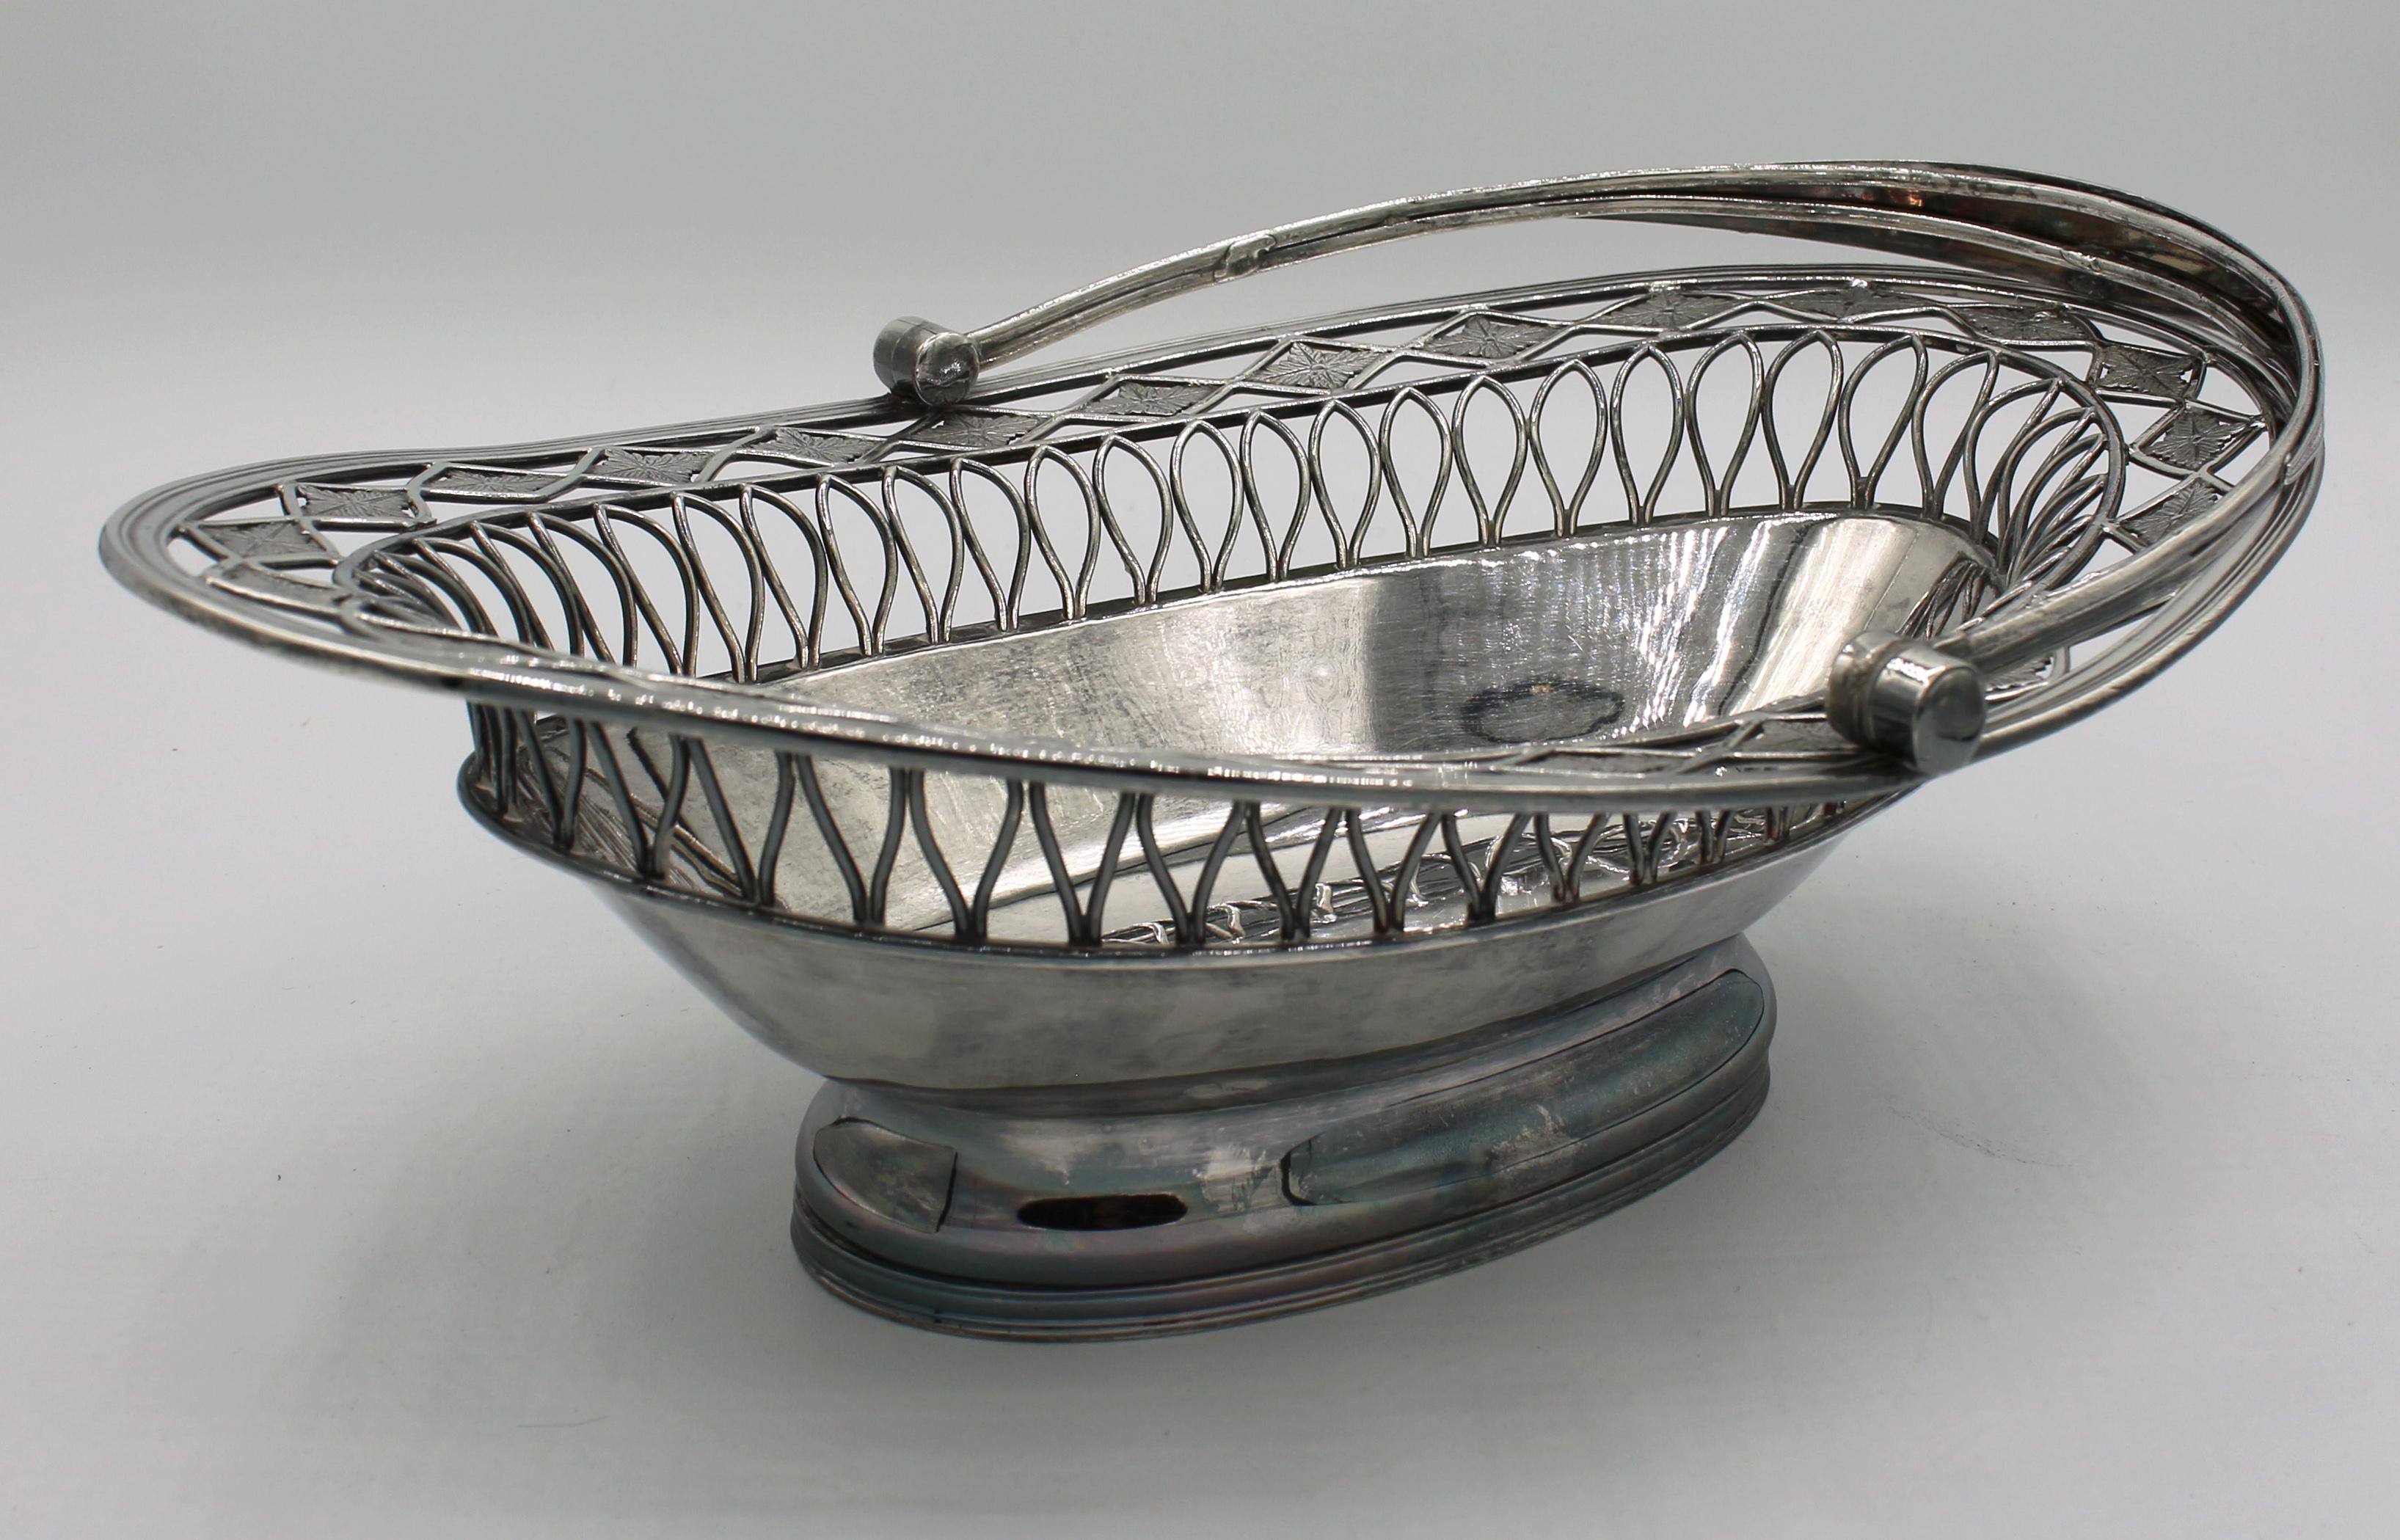 Old Sheffield plate basket, neoclassical taste and period. Every technique of stamped and drawn work with engraving is used. Note handle construction. Provenance: Annette Tilford Haskell, daughter of Henry Morgan Tilford (1856-1911) founder of